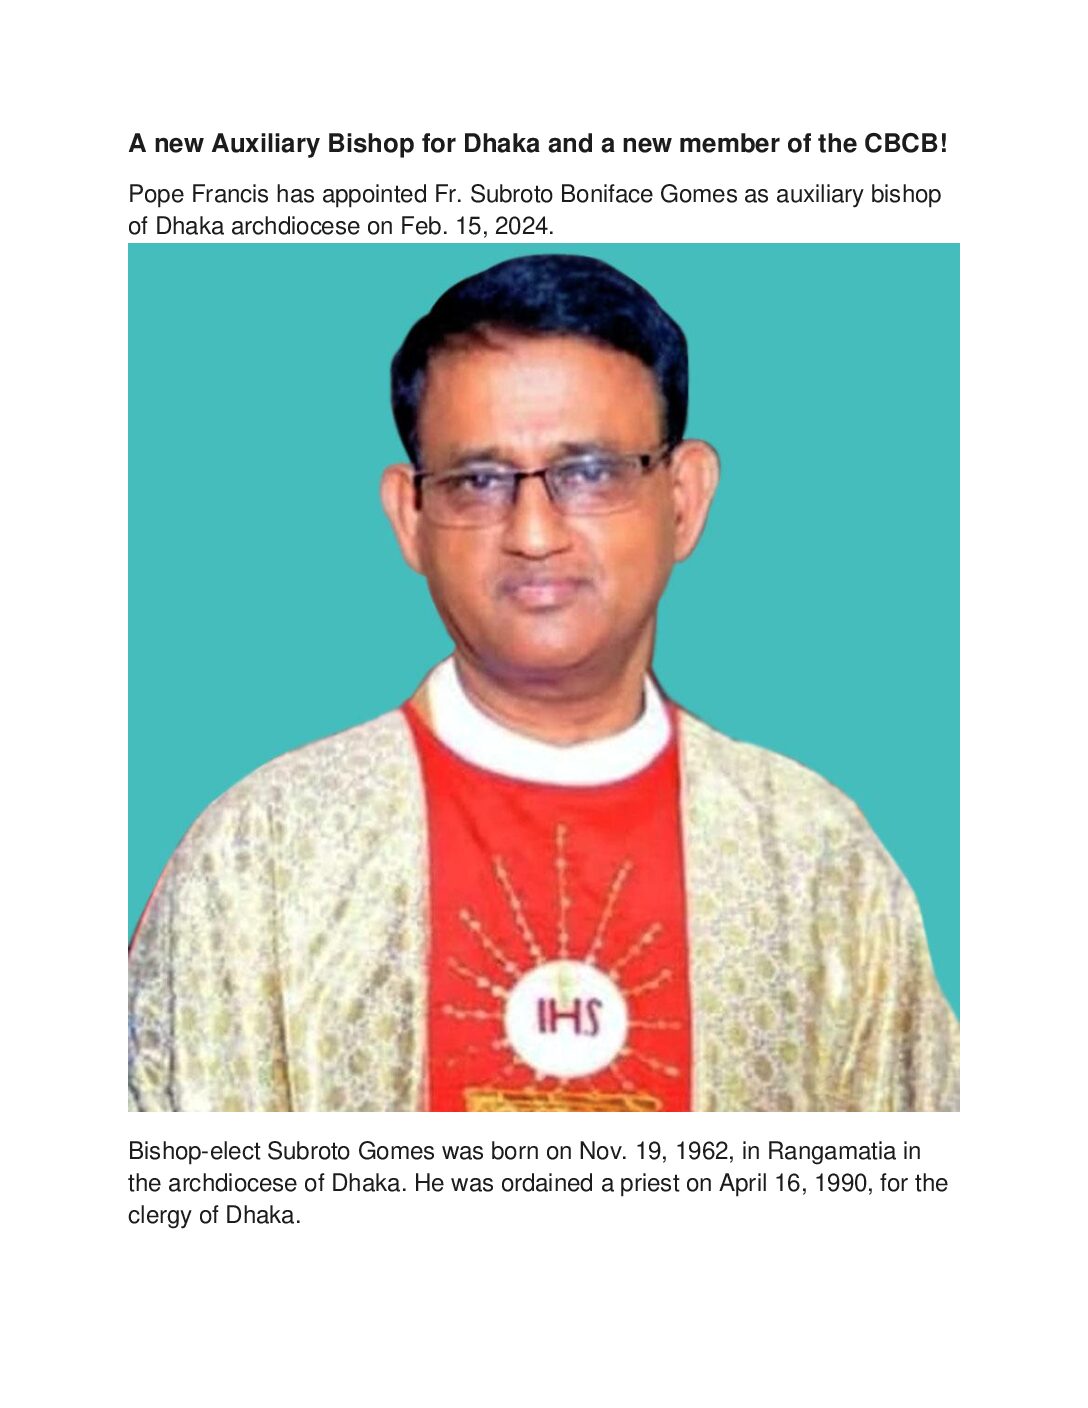 A new Auxiliary Bishop for Dhaka and a new member of the CBCB!